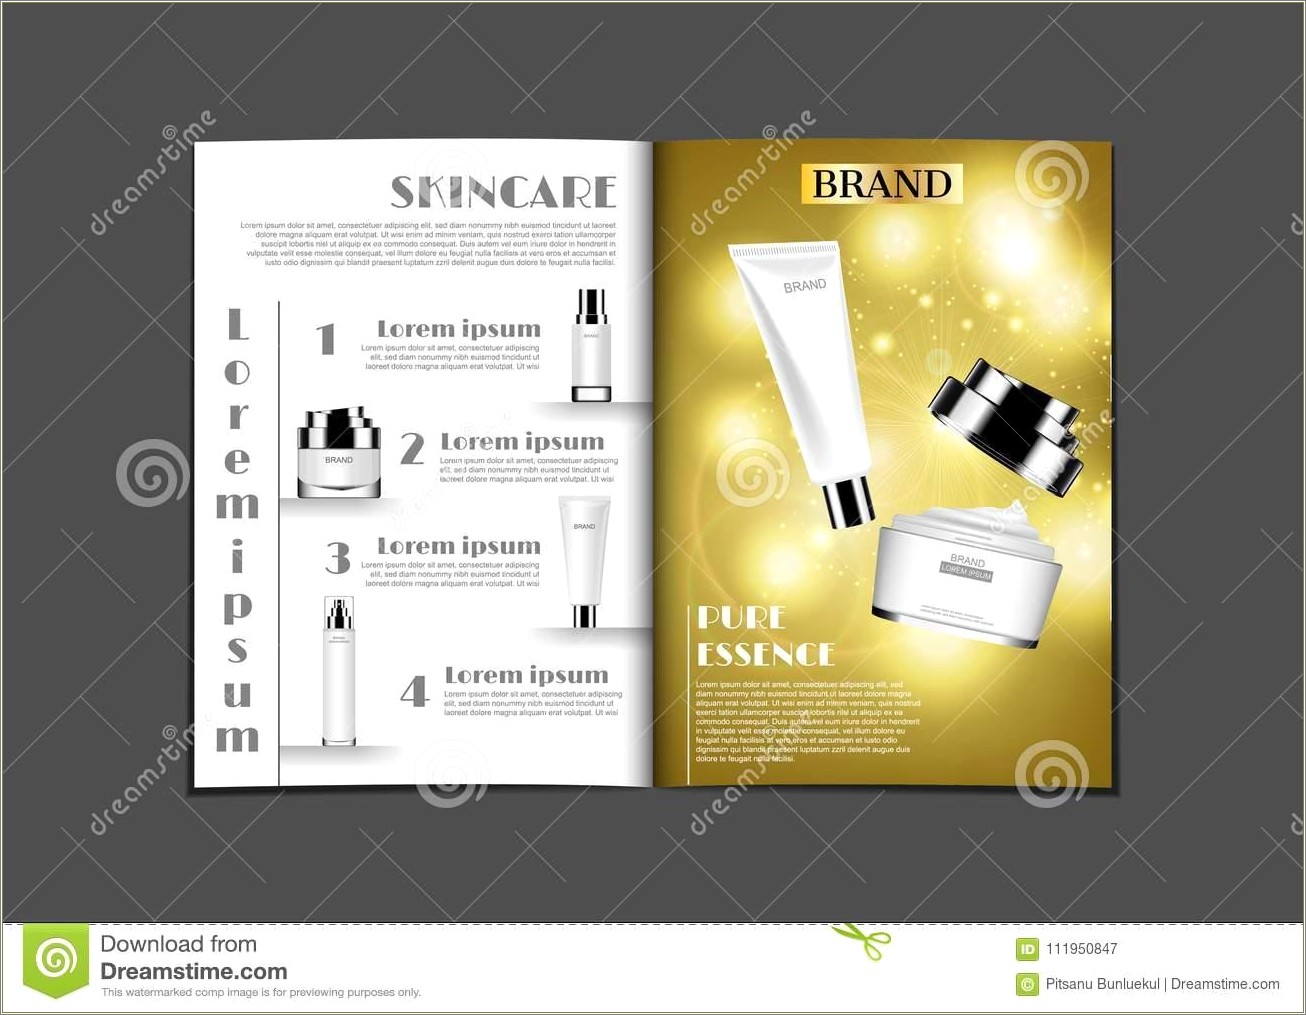 Free Brochure Template For Skin Care Product